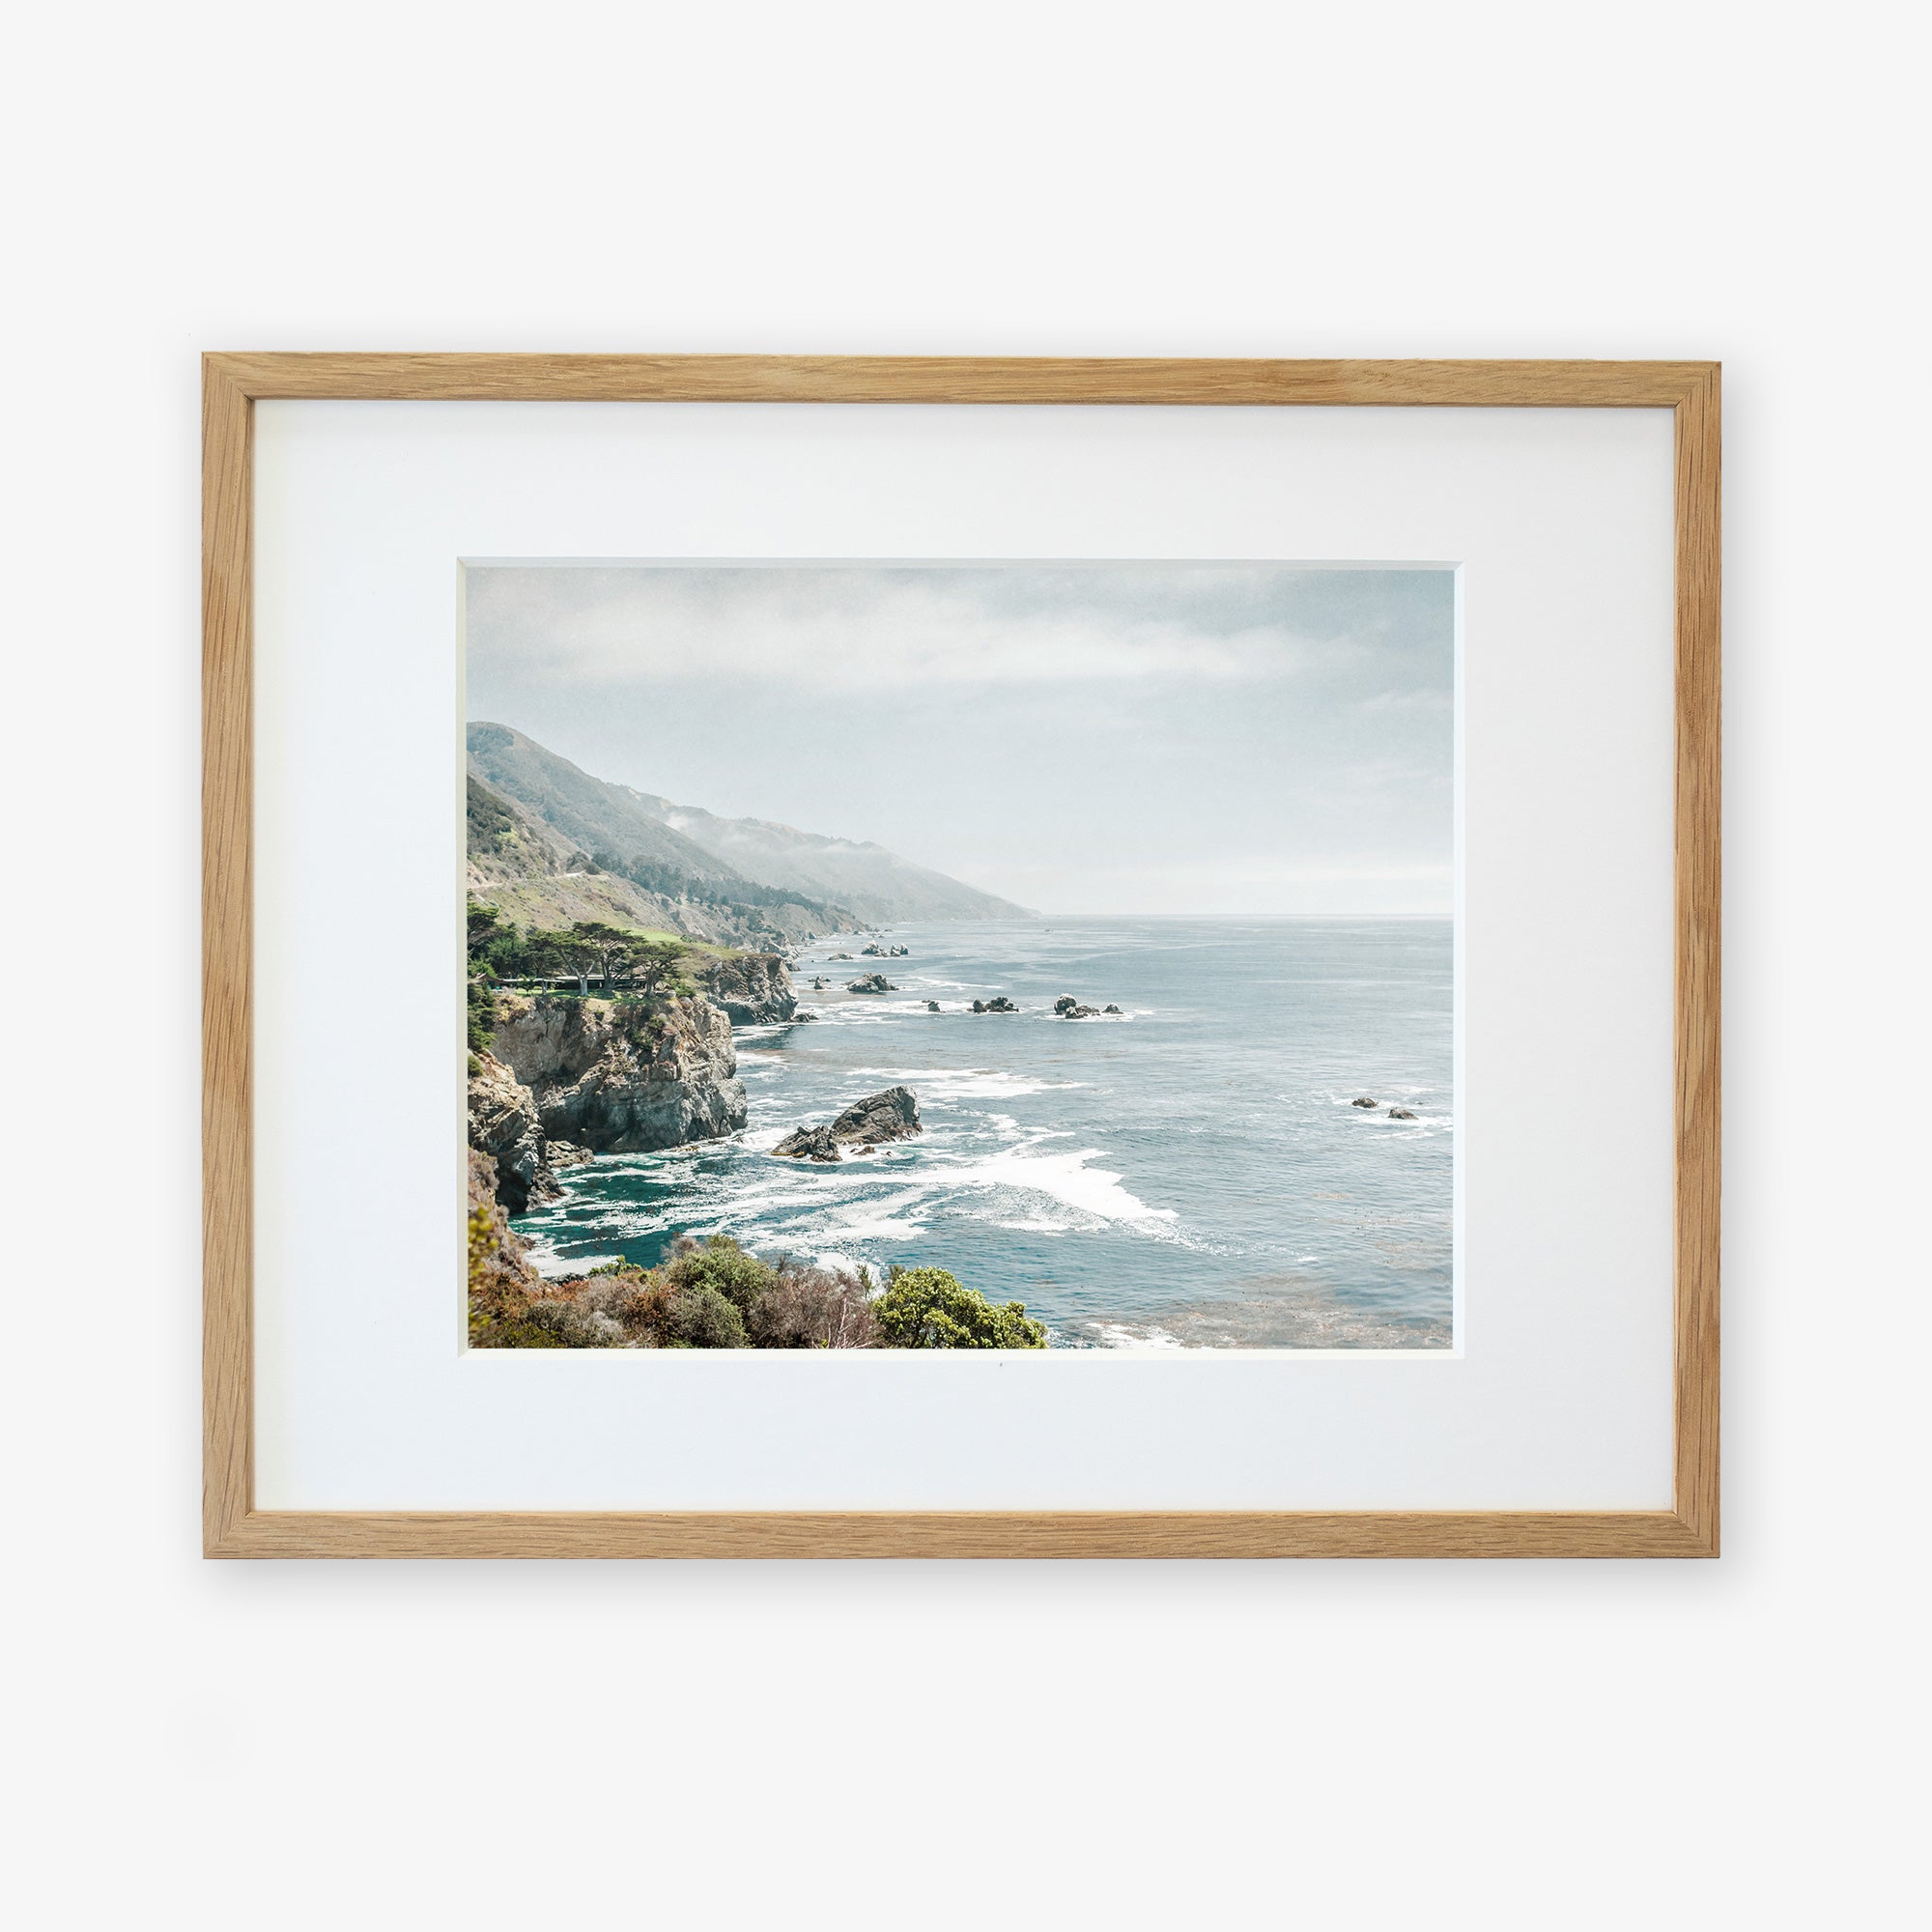 A framed wall art featuring a picturesque coastal scene from Big Sur, with cliffs, the ocean, and distant fog. The light wooden frame complements the serene coastal colors. - Offley Green&#39;s Big Sur Landscape Print, &#39;Rocky Rocks&#39;